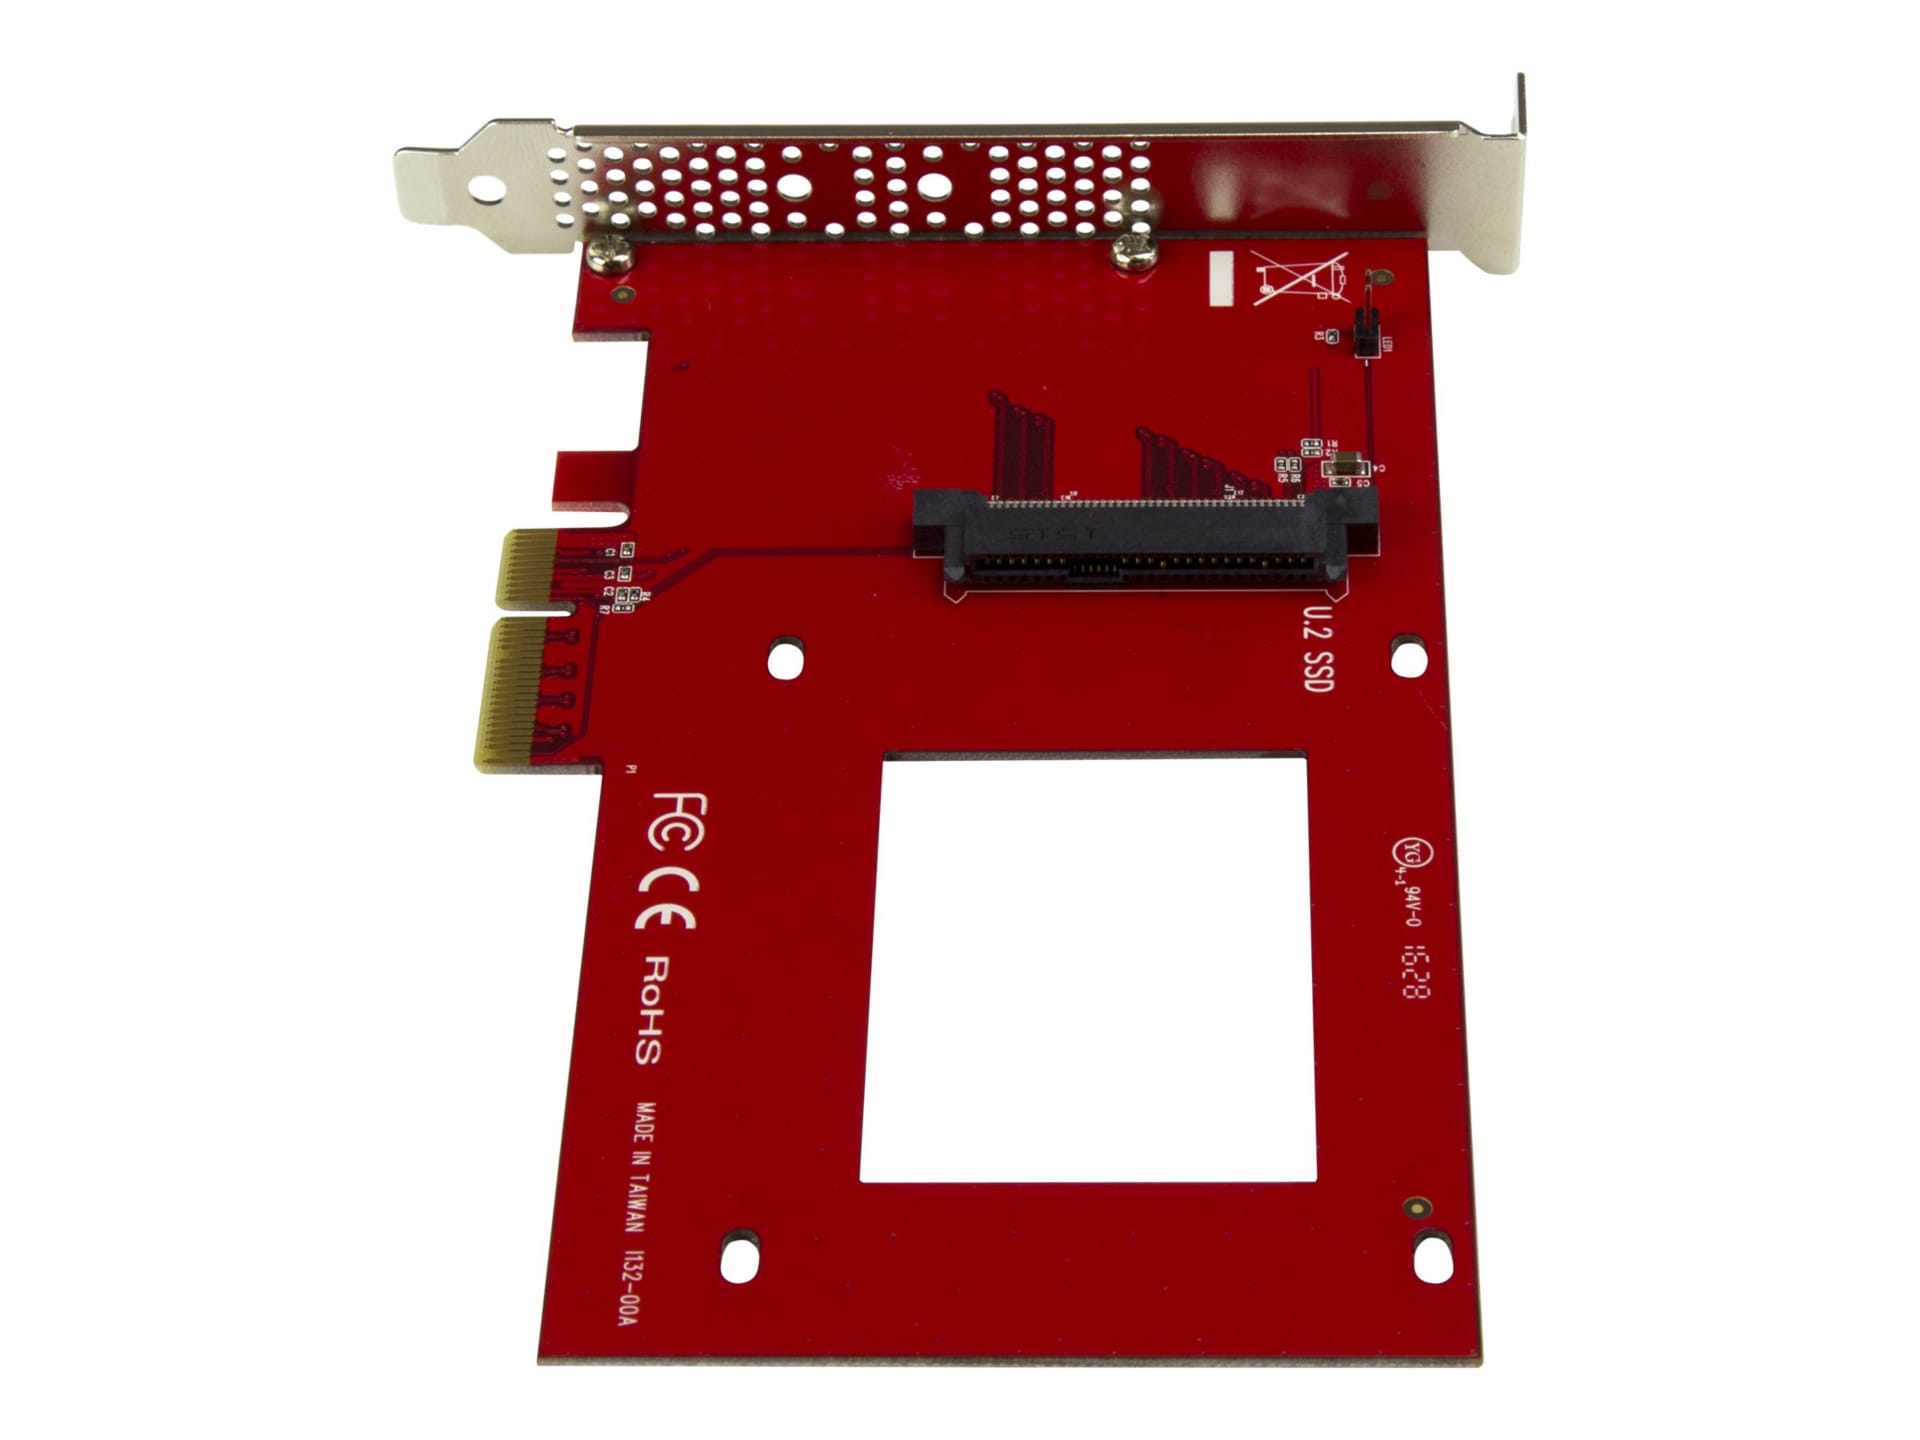 Adapter, U.2 to M.2 - 2.5” U.2 NVMe SSD - Drive Adapters and Drive